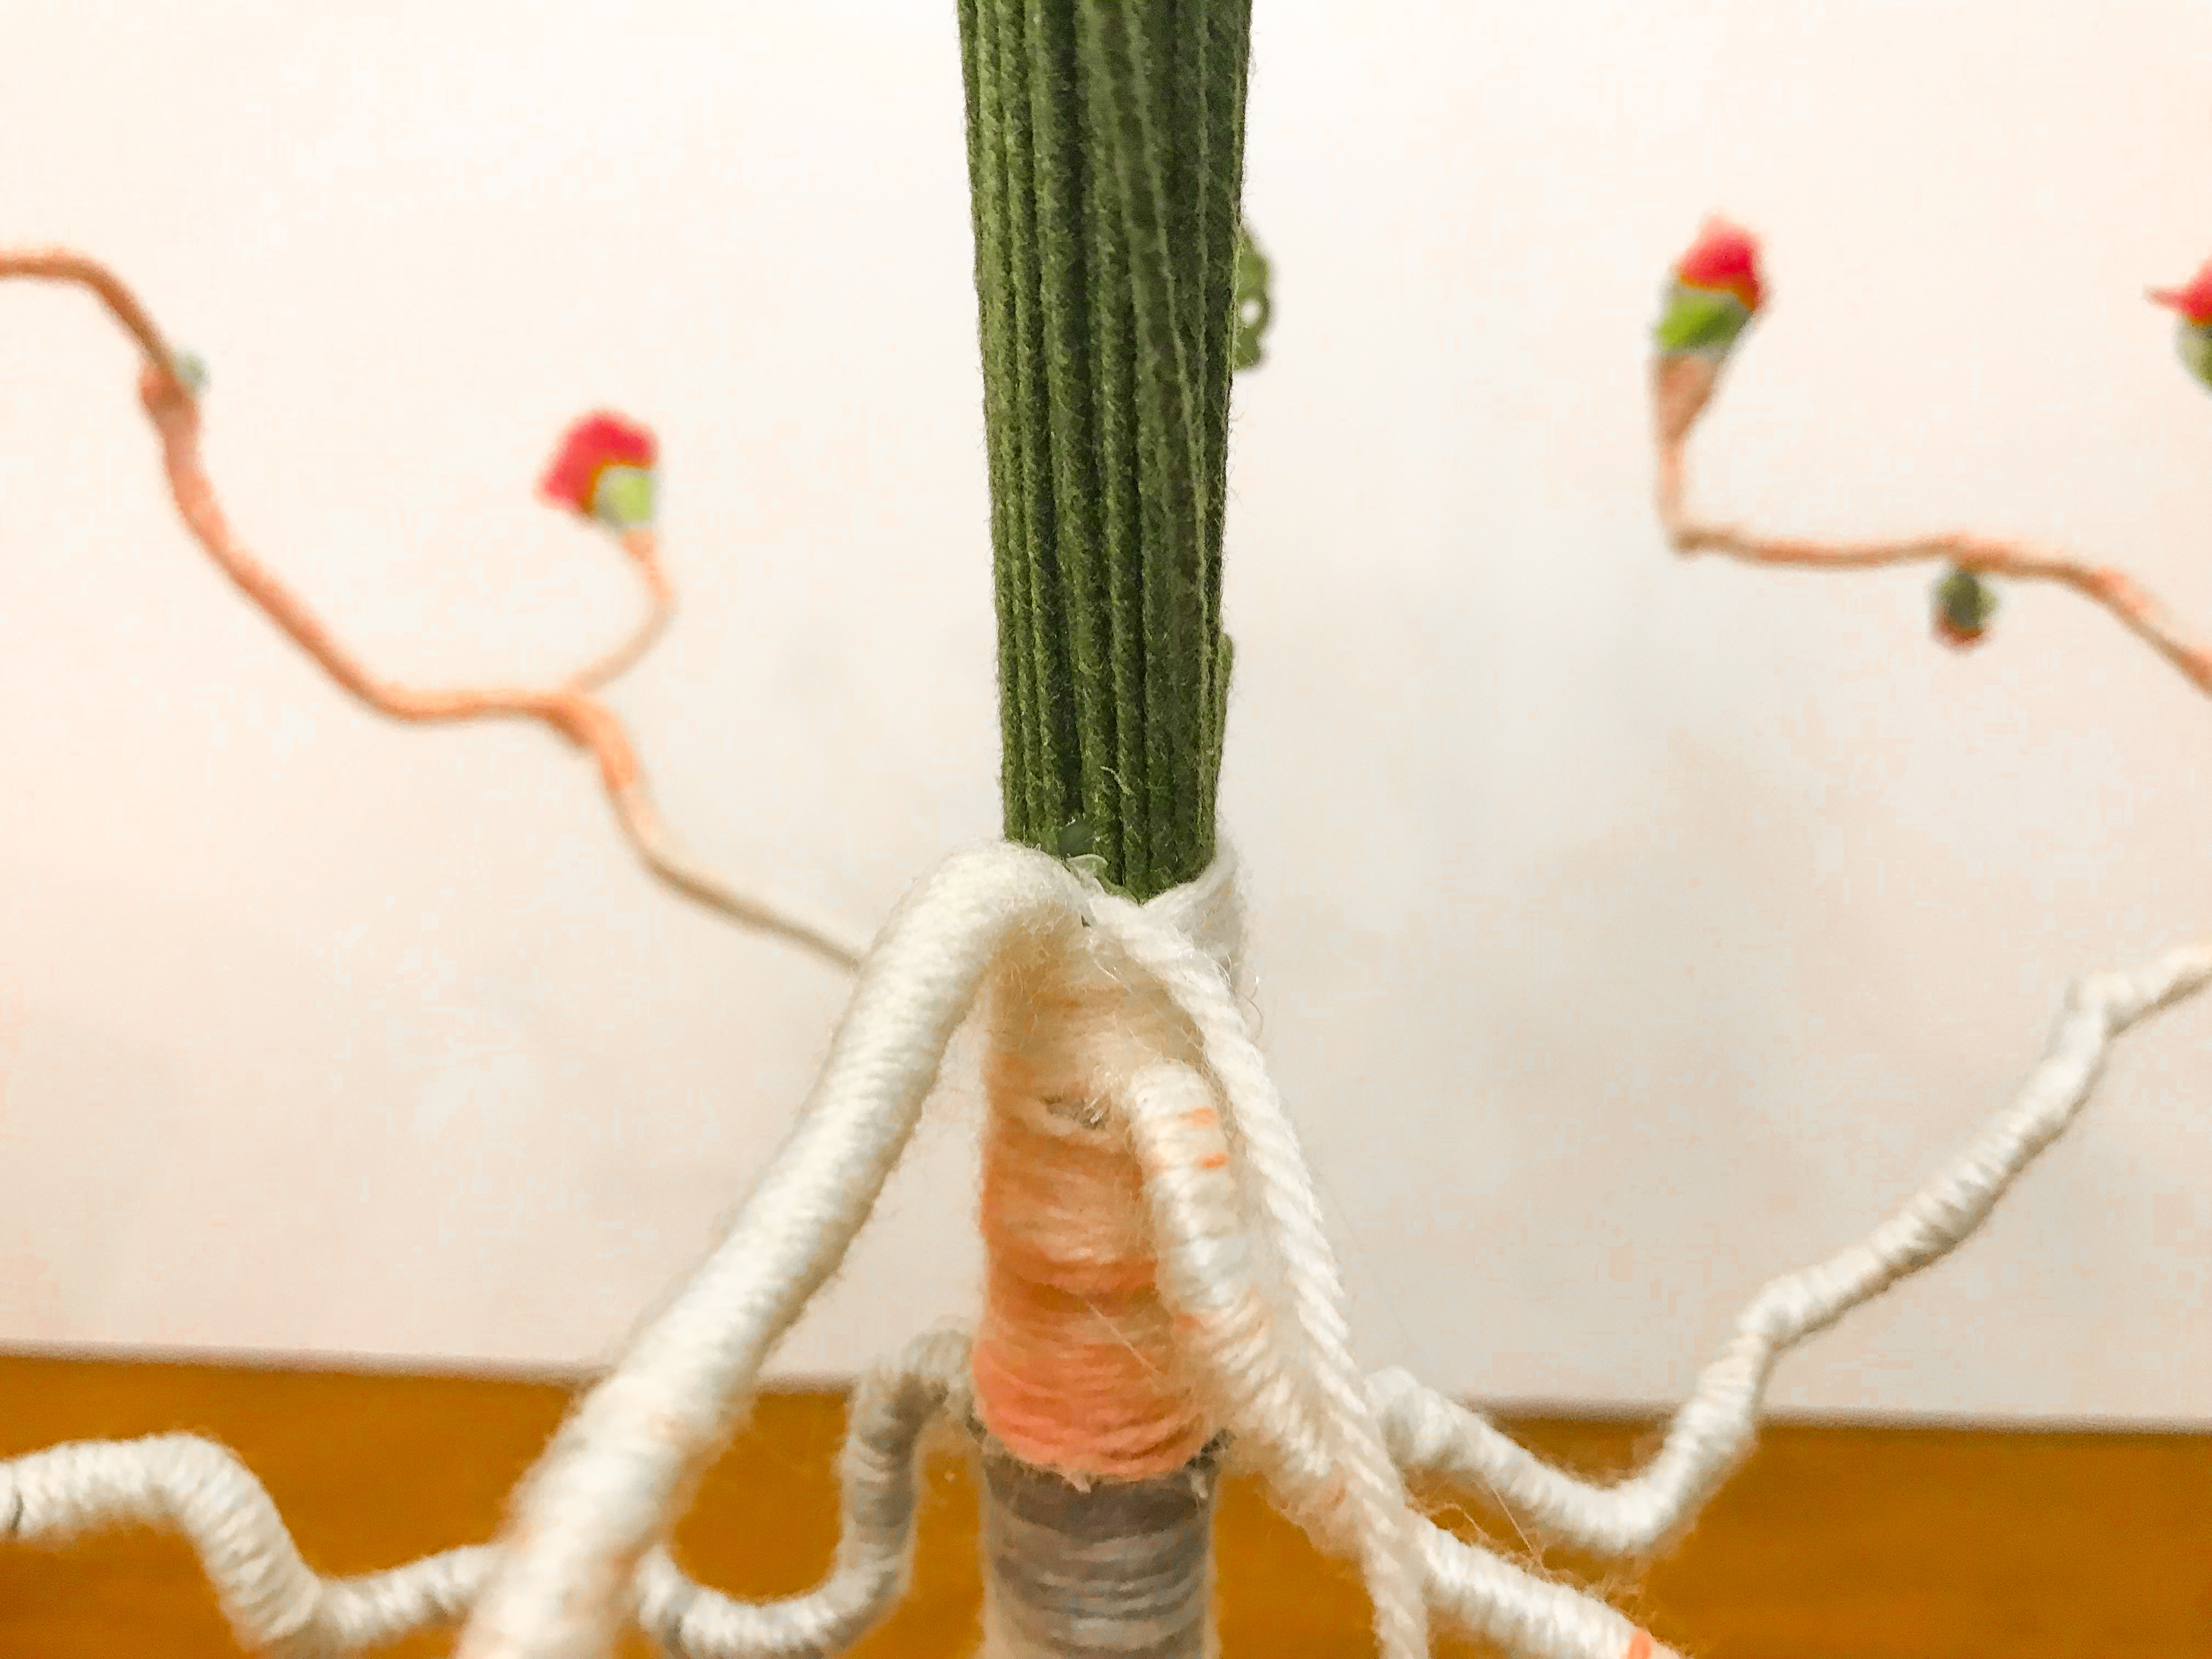 Yarn pushed into hot glue at junction of yarn wrapped branch and unwrapped floral stem trunk.